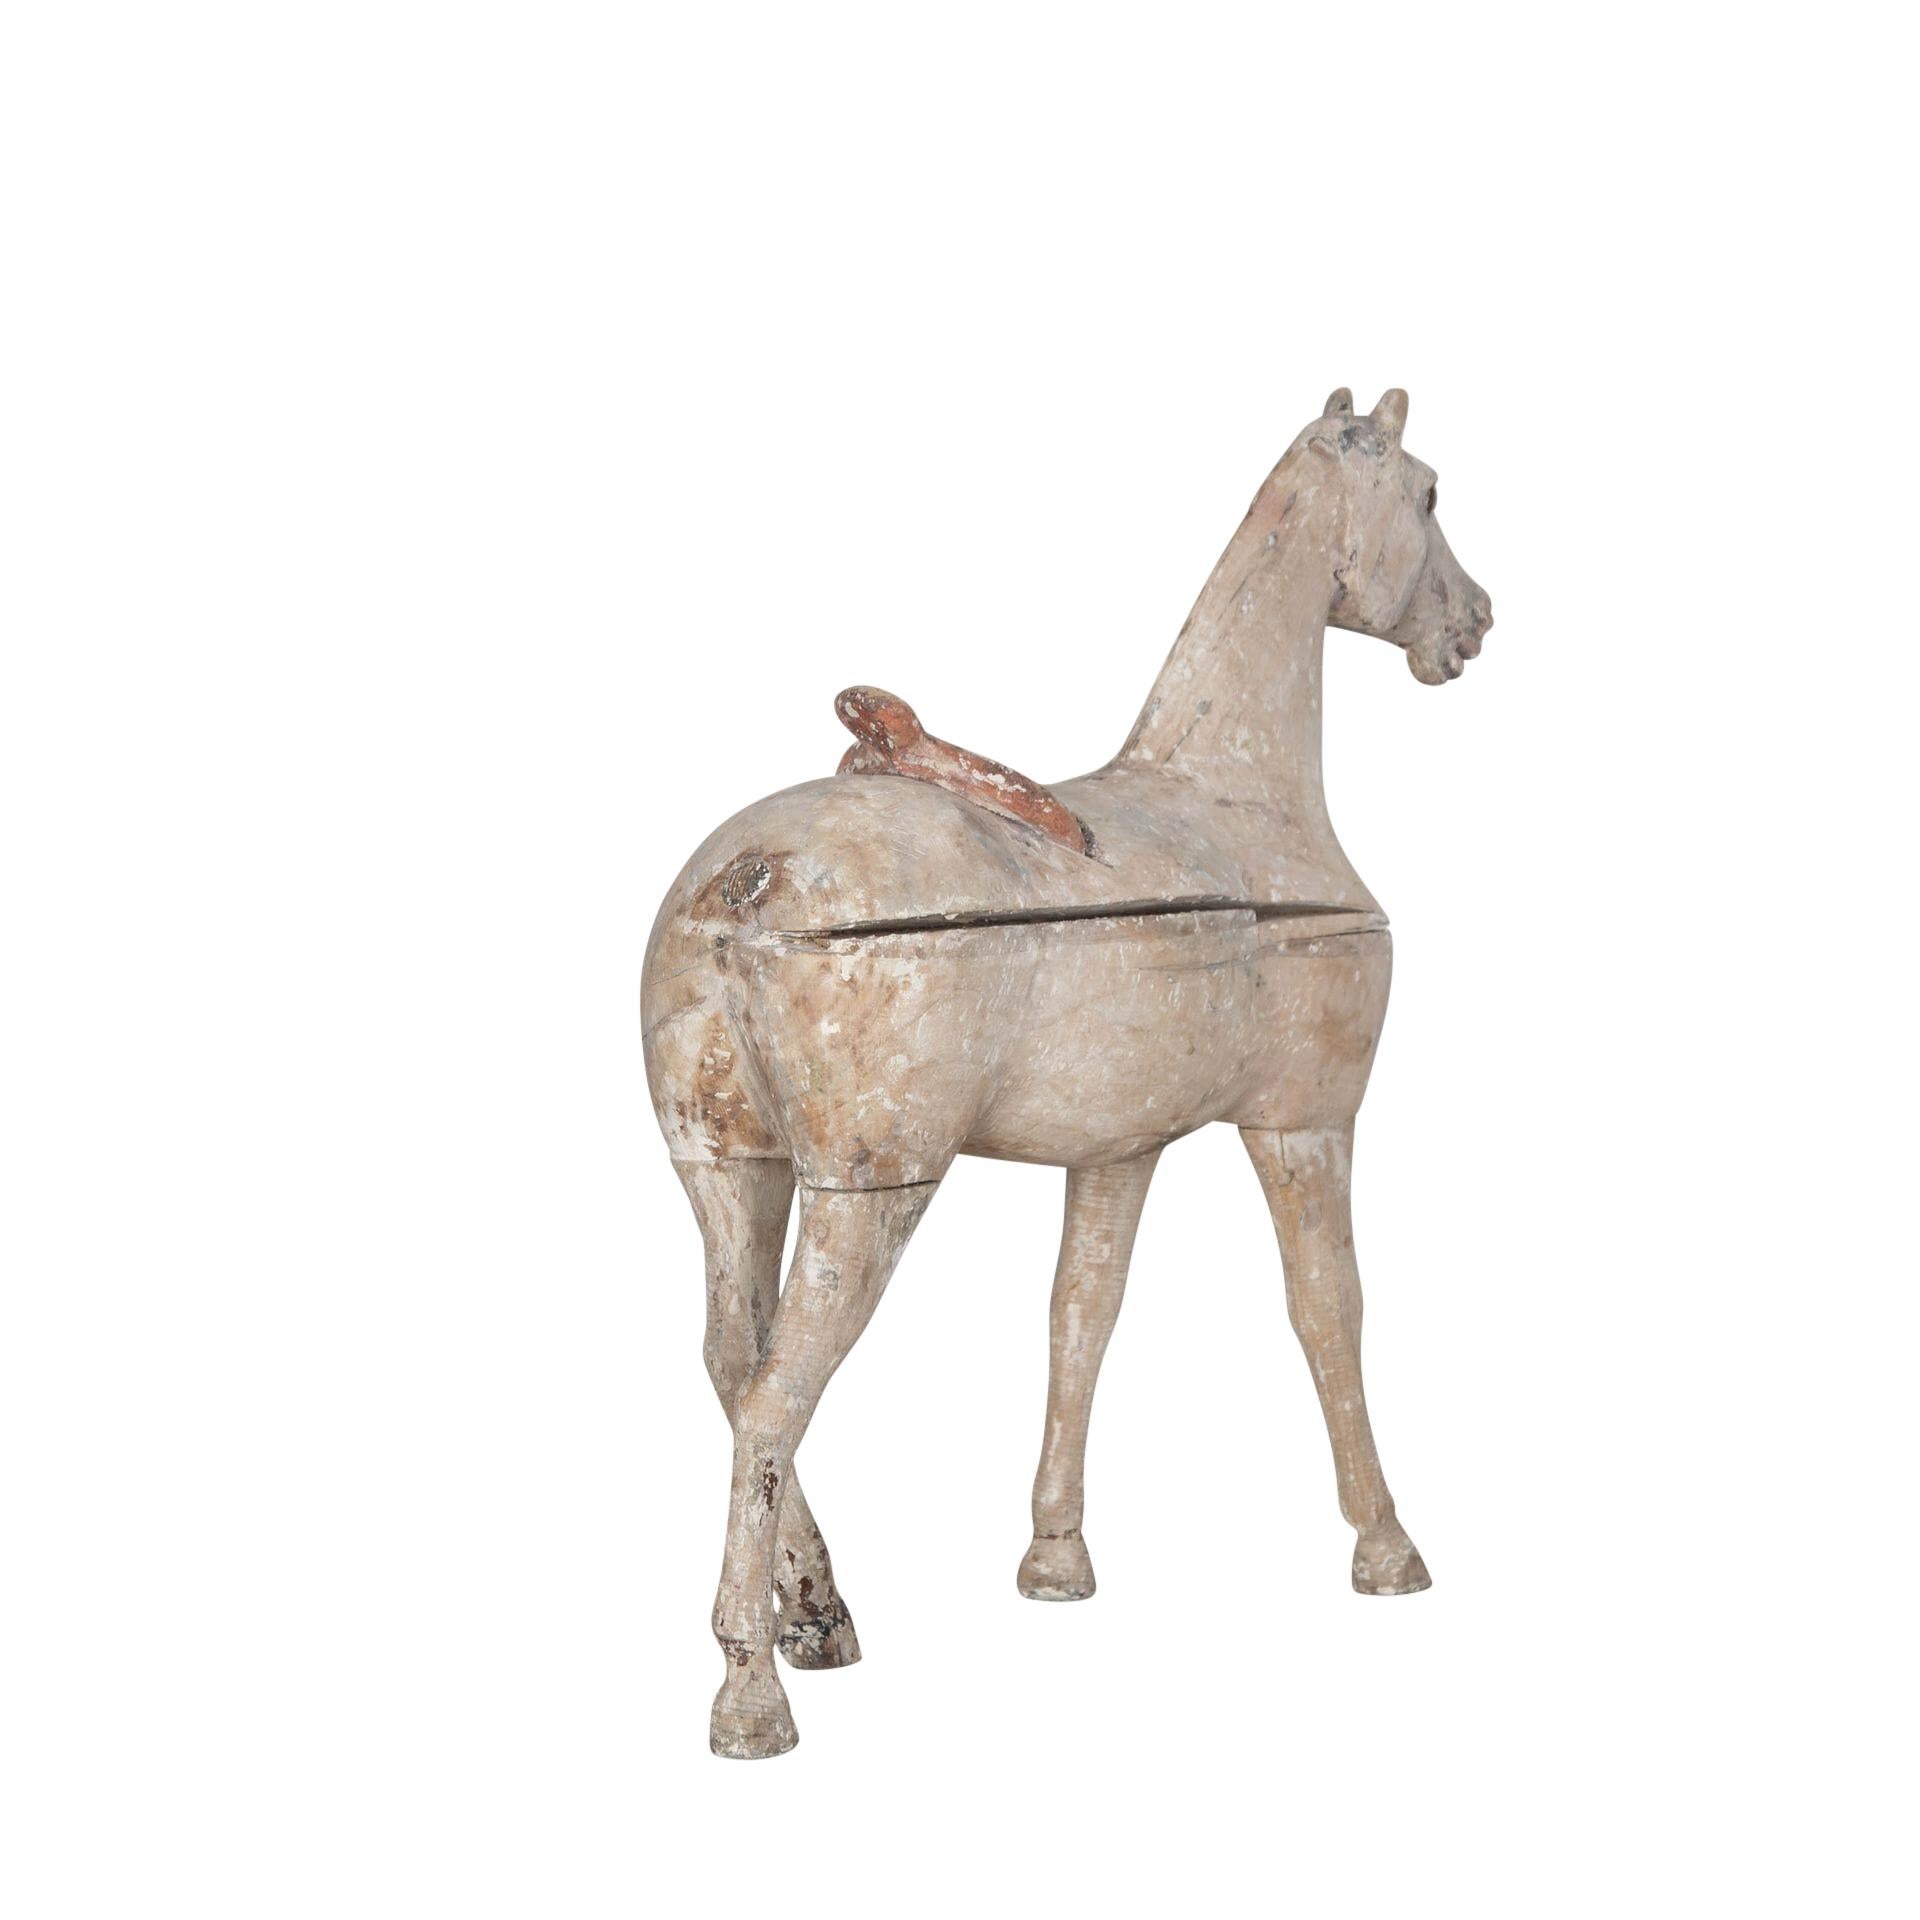 19th century wooden horse.
Dry scraped to charming time worn patina.